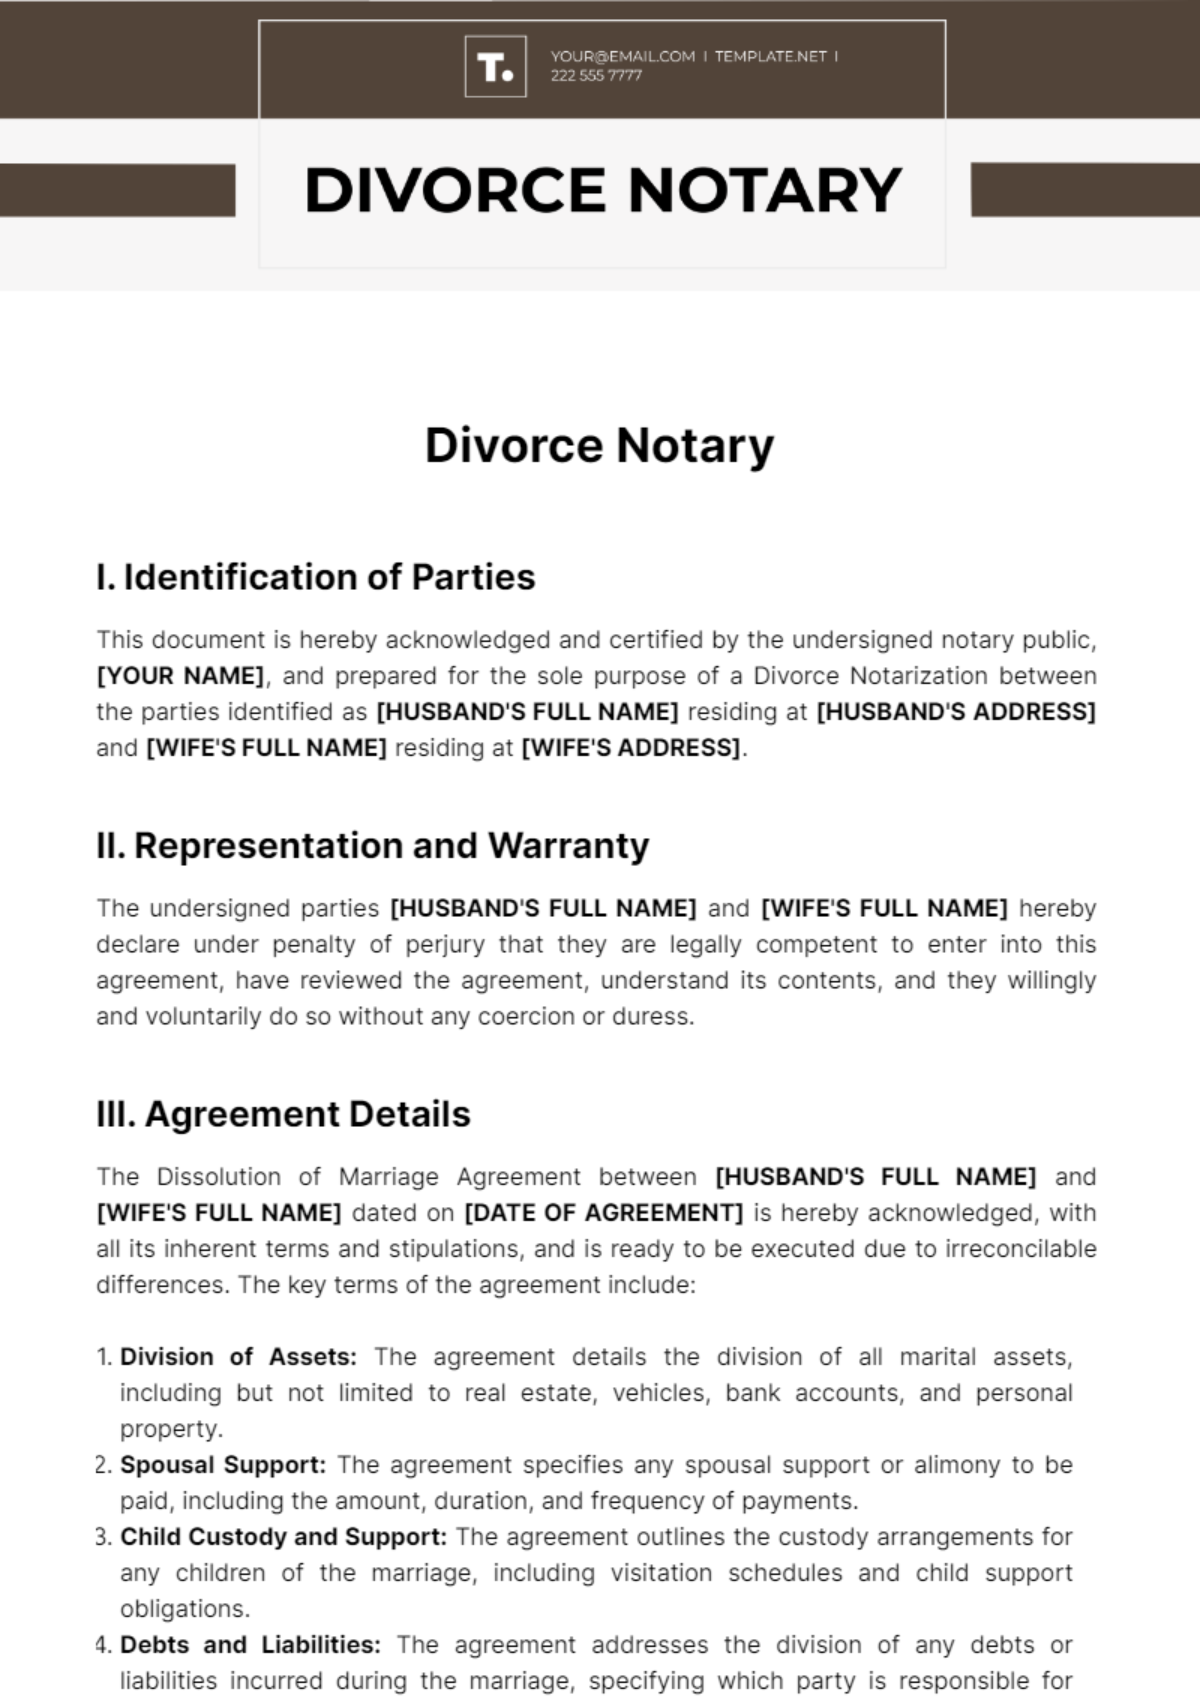 Divorce Notary Template